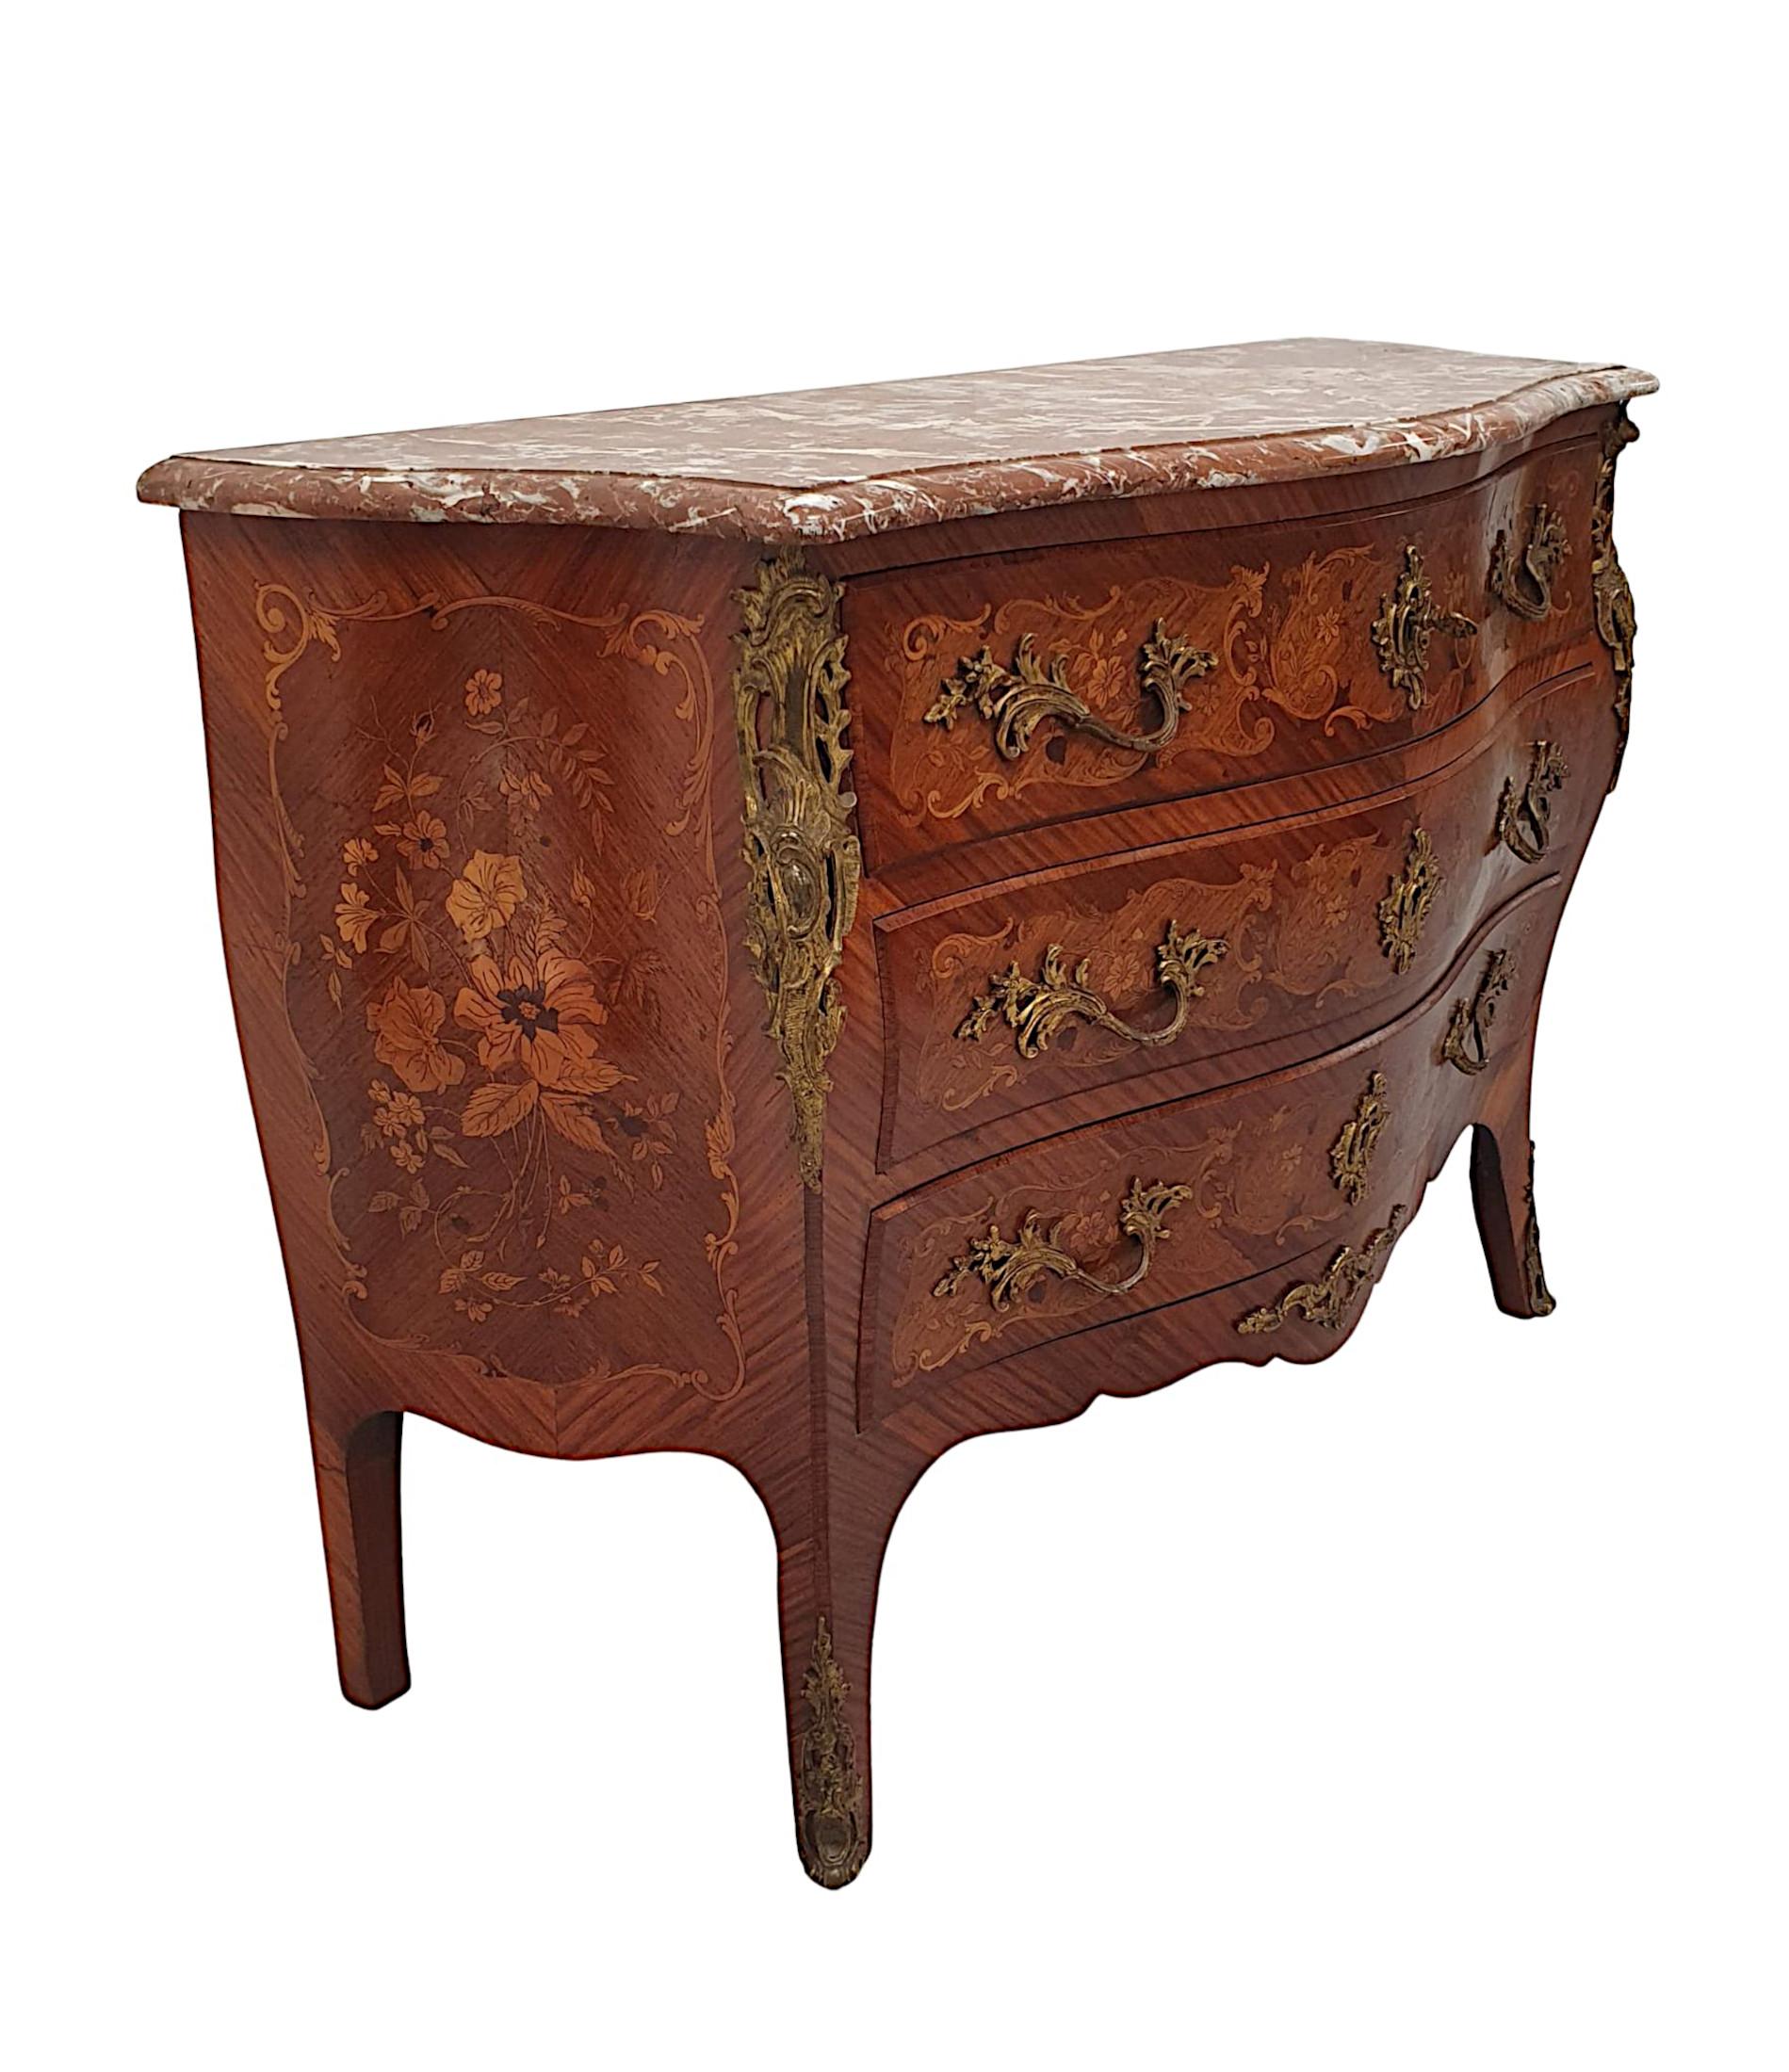 A very fine 19th century marquetry marble top chest of drawers of serpentine form, finely hand carved with gorgeously rich patination and grain. Ormolu mounted throughout and intricately inlaid with beautiful marquetry panels depicting exquisite